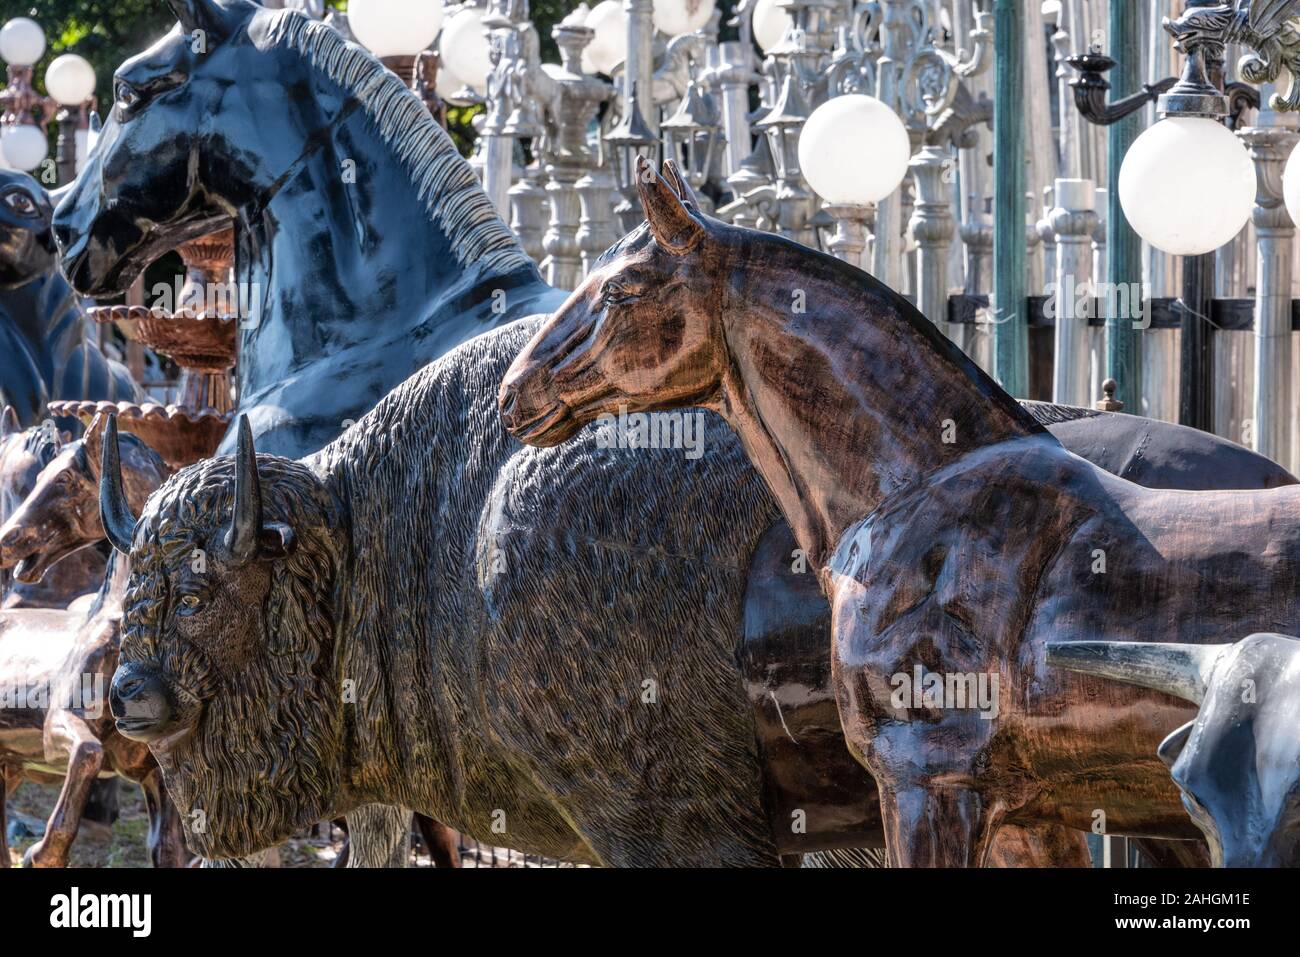 Large painted animal statues made of recycled cast aluminum at Barberville Roadside Yard Art Emporium in Pierson, Florida. (USA) Stock Photo